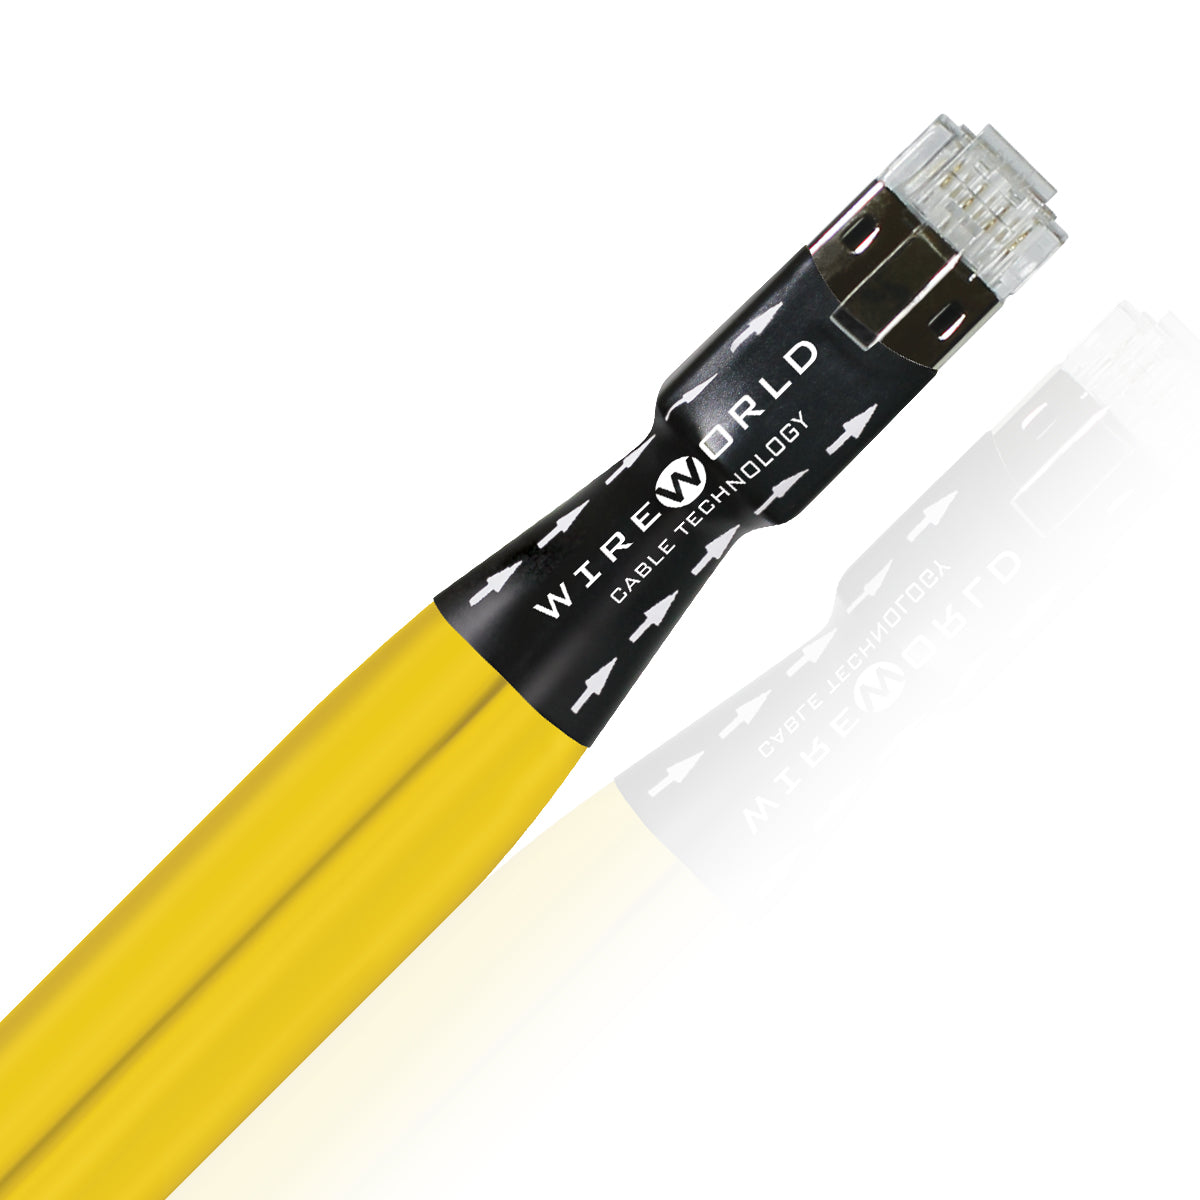 Wireworld Chroma 8 Professional Ethernet Cable